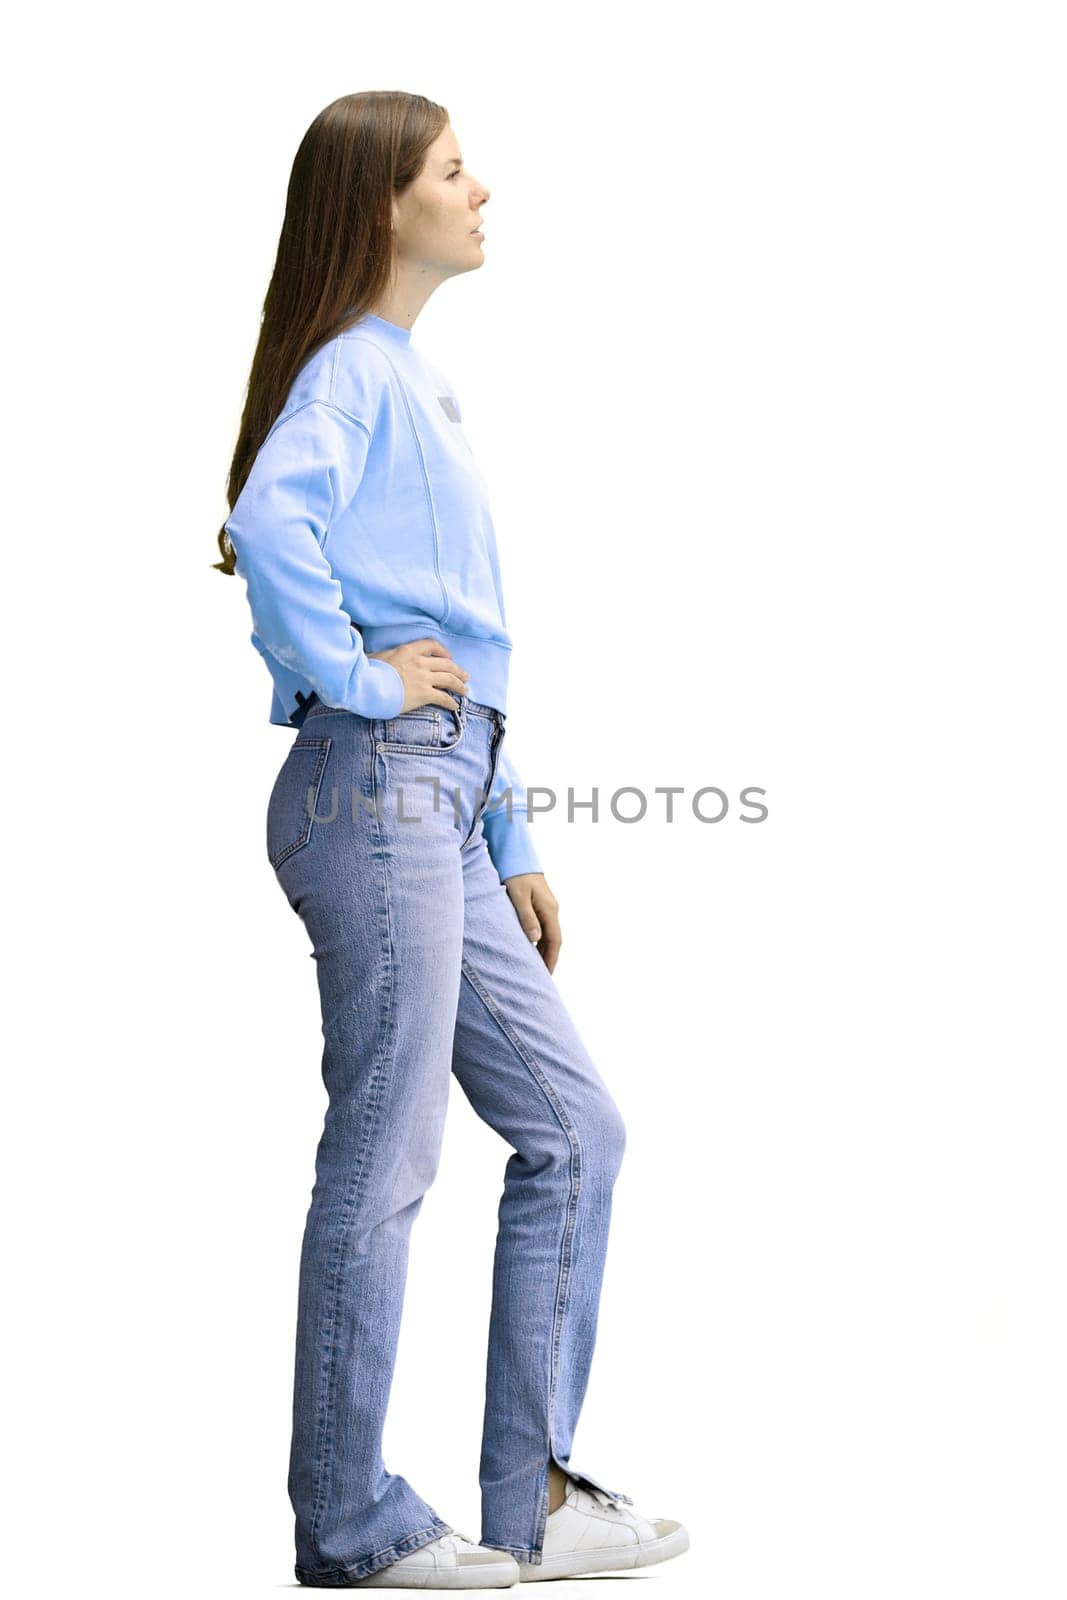 A woman, full-length, on a white background, spreads her arms by Prosto